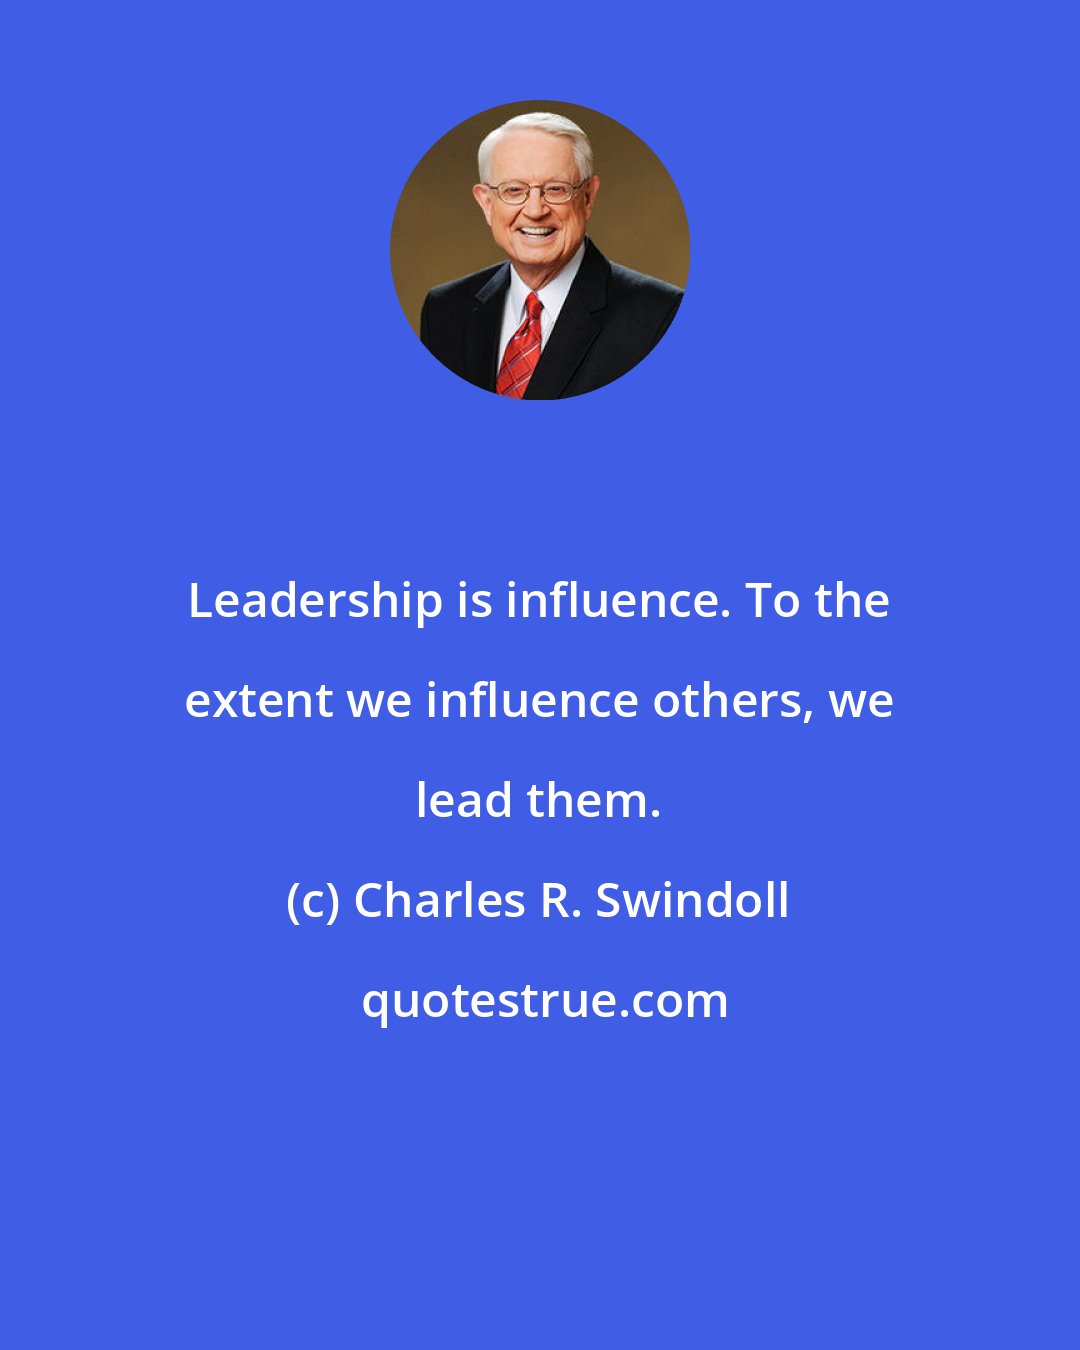 Charles R. Swindoll: Leadership is influence. To the extent we influence others, we lead them.